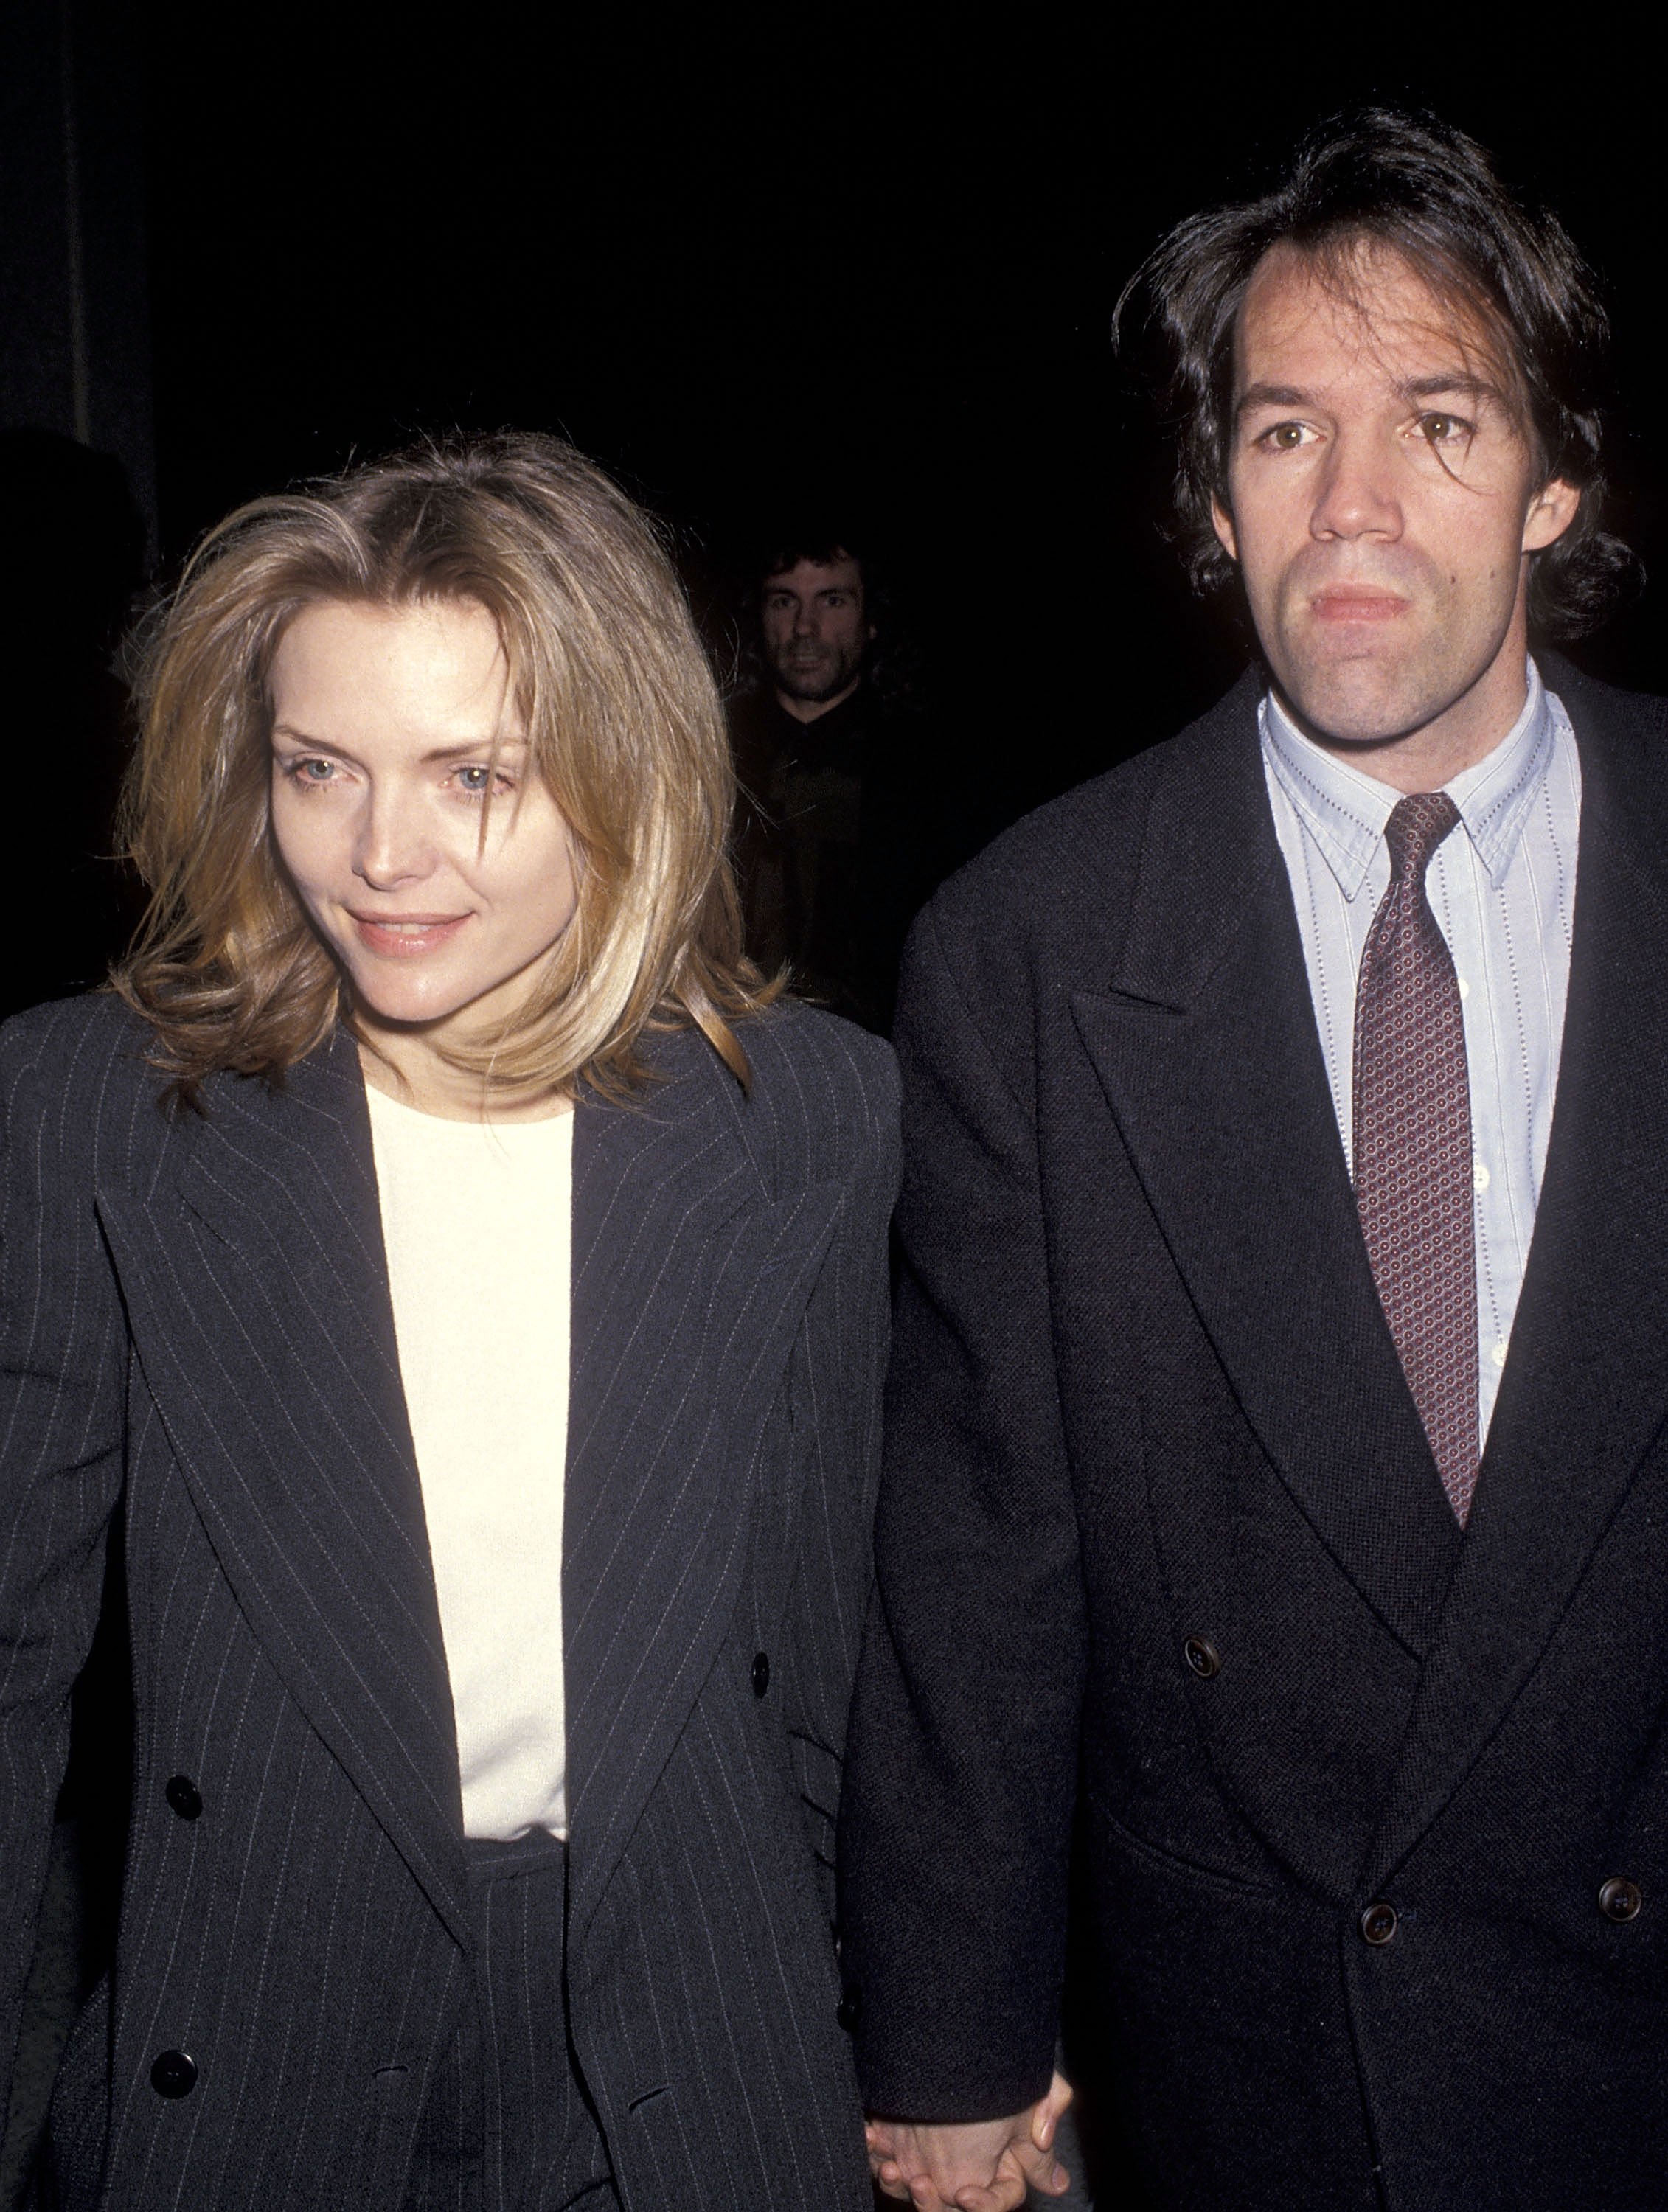 Actress Michelle Pfeiffer and writer/producer David E. Kelley attend "The Substance of Fire" Opening Night Play Performance on January 21, 1993 in Los Angeles California | Source: Getty Images